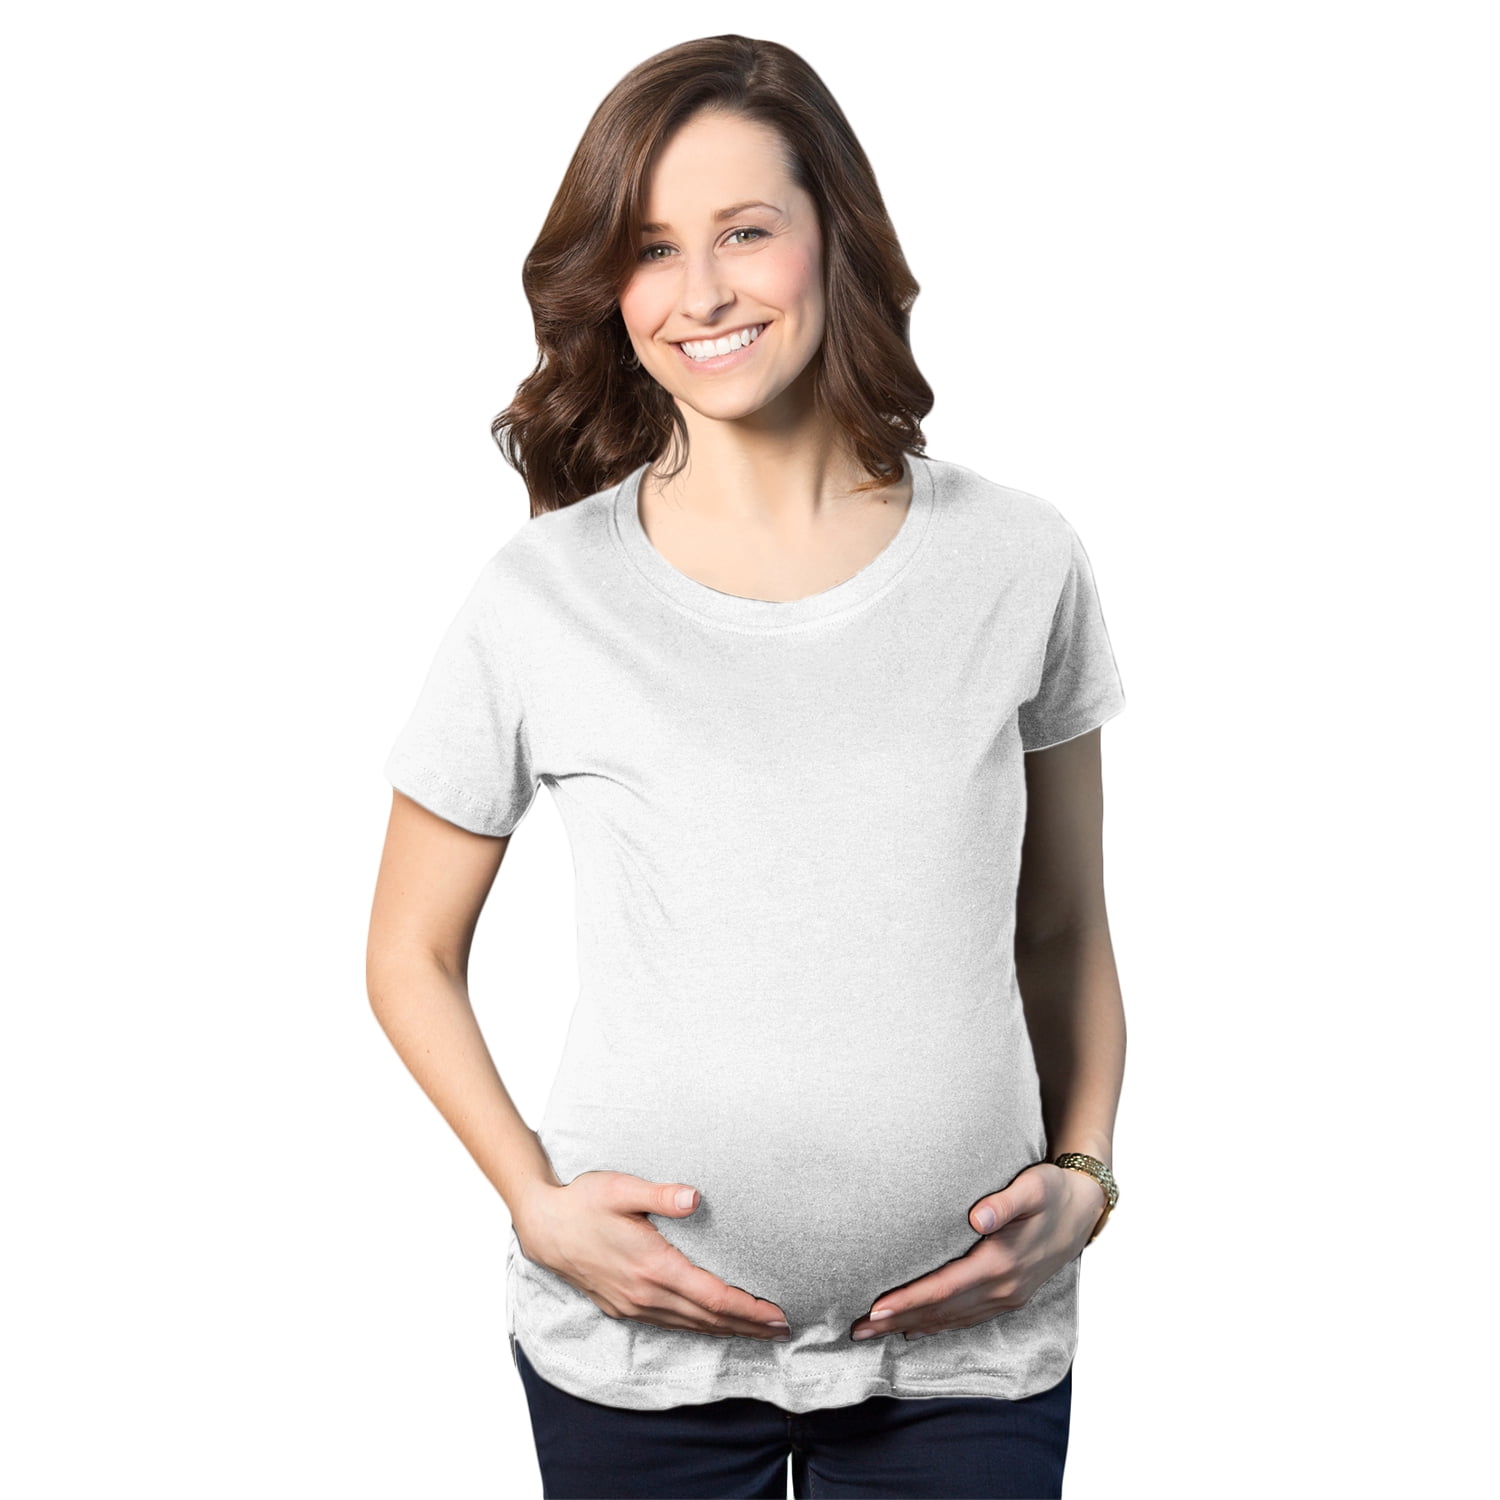 Funny pregnancy Maternity T-shirt Stand back maternity tee shirt jersey top 